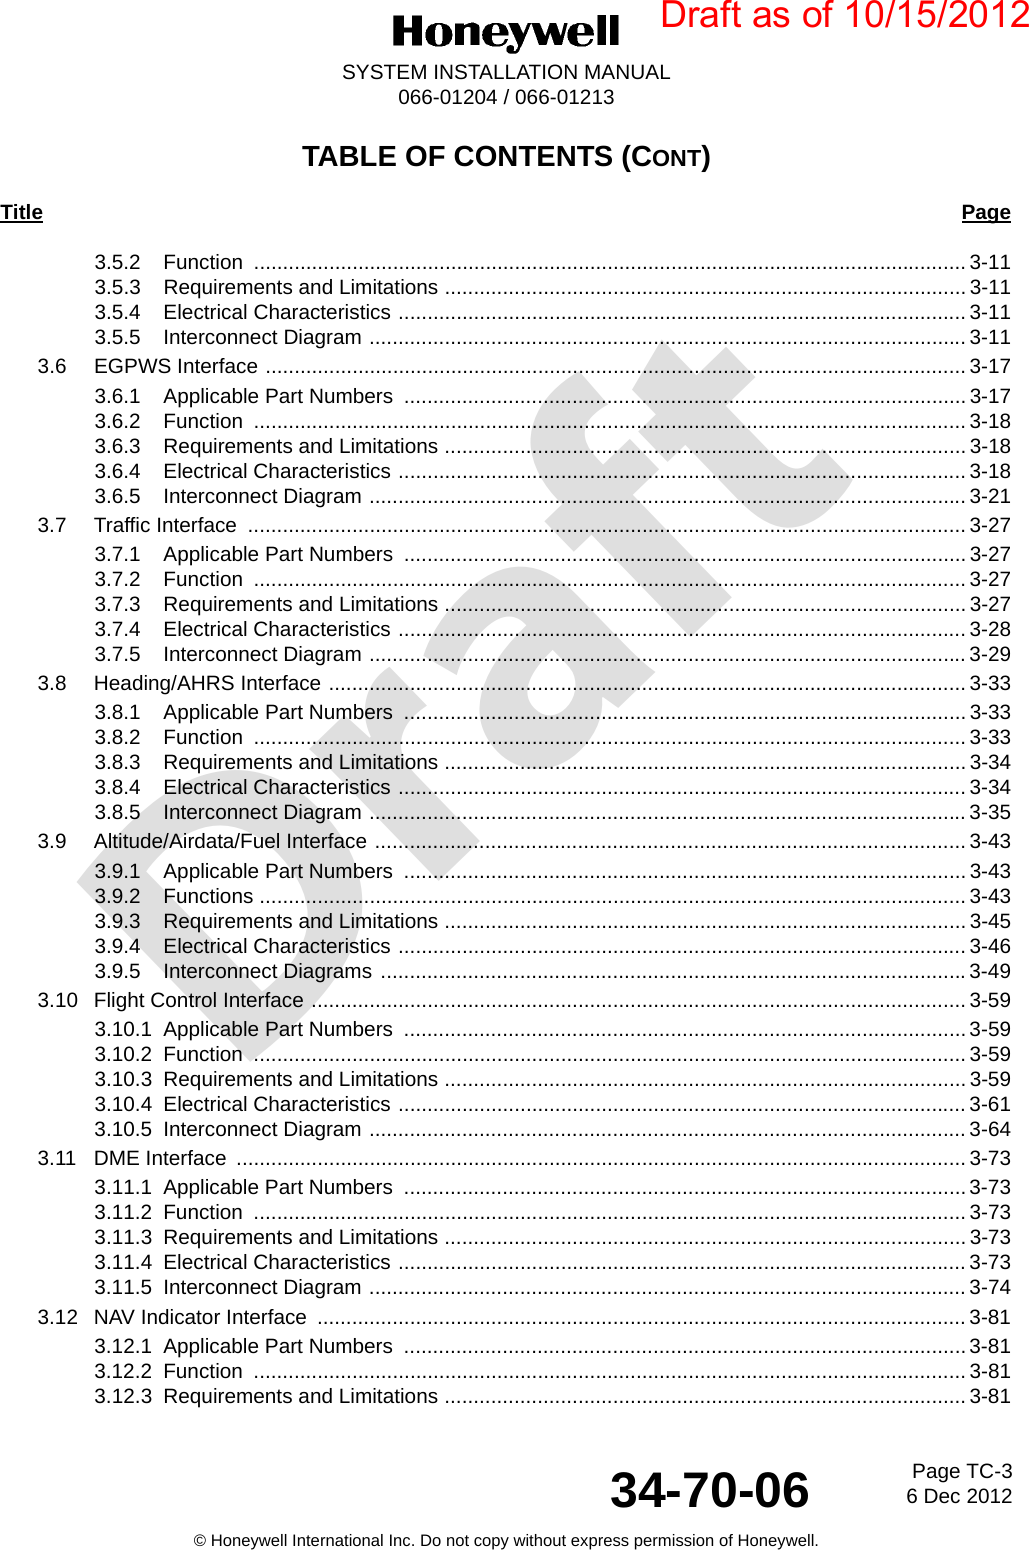 DraftPage TC-36 Dec 201234-70-06SYSTEM INSTALLATION MANUAL066-01204 / 066-01213© Honeywell International Inc. Do not copy without express permission of Honeywell.TABLE OF CONTENTS (CONT)Title Page3.5.2 Function ........................................................................................................................... 3-113.5.3 Requirements and Limitations .......................................................................................... 3-113.5.4 Electrical Characteristics .................................................................................................. 3-113.5.5 Interconnect Diagram ....................................................................................................... 3-113.6 EGPWS Interface ......................................................................................................................... 3-173.6.1 Applicable Part Numbers  ................................................................................................. 3-173.6.2 Function ........................................................................................................................... 3-183.6.3 Requirements and Limitations .......................................................................................... 3-183.6.4 Electrical Characteristics .................................................................................................. 3-183.6.5 Interconnect Diagram ....................................................................................................... 3-213.7 Traffic Interface  ............................................................................................................................ 3-273.7.1 Applicable Part Numbers  ................................................................................................. 3-273.7.2 Function ........................................................................................................................... 3-273.7.3 Requirements and Limitations .......................................................................................... 3-273.7.4 Electrical Characteristics .................................................................................................. 3-283.7.5 Interconnect Diagram ....................................................................................................... 3-293.8 Heading/AHRS Interface .............................................................................................................. 3-333.8.1 Applicable Part Numbers  ................................................................................................. 3-333.8.2 Function ........................................................................................................................... 3-333.8.3 Requirements and Limitations .......................................................................................... 3-343.8.4 Electrical Characteristics .................................................................................................. 3-343.8.5 Interconnect Diagram ....................................................................................................... 3-353.9 Altitude/Airdata/Fuel Interface ...................................................................................................... 3-433.9.1 Applicable Part Numbers  ................................................................................................. 3-433.9.2 Functions .......................................................................................................................... 3-433.9.3 Requirements and Limitations .......................................................................................... 3-453.9.4 Electrical Characteristics .................................................................................................. 3-463.9.5 Interconnect Diagrams ..................................................................................................... 3-49 3.10 Flight Control Interface ................................................................................................................. 3-593.10.1 Applicable Part Numbers  .................................................................................................3-593.10.2 Function ........................................................................................................................... 3-593.10.3 Requirements and Limitations .......................................................................................... 3-593.10.4 Electrical Characteristics .................................................................................................. 3-613.10.5 Interconnect Diagram ....................................................................................................... 3-643.11 DME Interface  .............................................................................................................................. 3-733.11.1 Applicable Part Numbers  .................................................................................................3-733.11.2 Function ........................................................................................................................... 3-733.11.3 Requirements and Limitations .......................................................................................... 3-733.11.4 Electrical Characteristics .................................................................................................. 3-733.11.5 Interconnect Diagram ....................................................................................................... 3-743.12 NAV Indicator Interface  ................................................................................................................ 3-813.12.1 Applicable Part Numbers  .................................................................................................3-813.12.2 Function ........................................................................................................................... 3-813.12.3 Requirements and Limitations .......................................................................................... 3-81Draft as of 10/15/2012